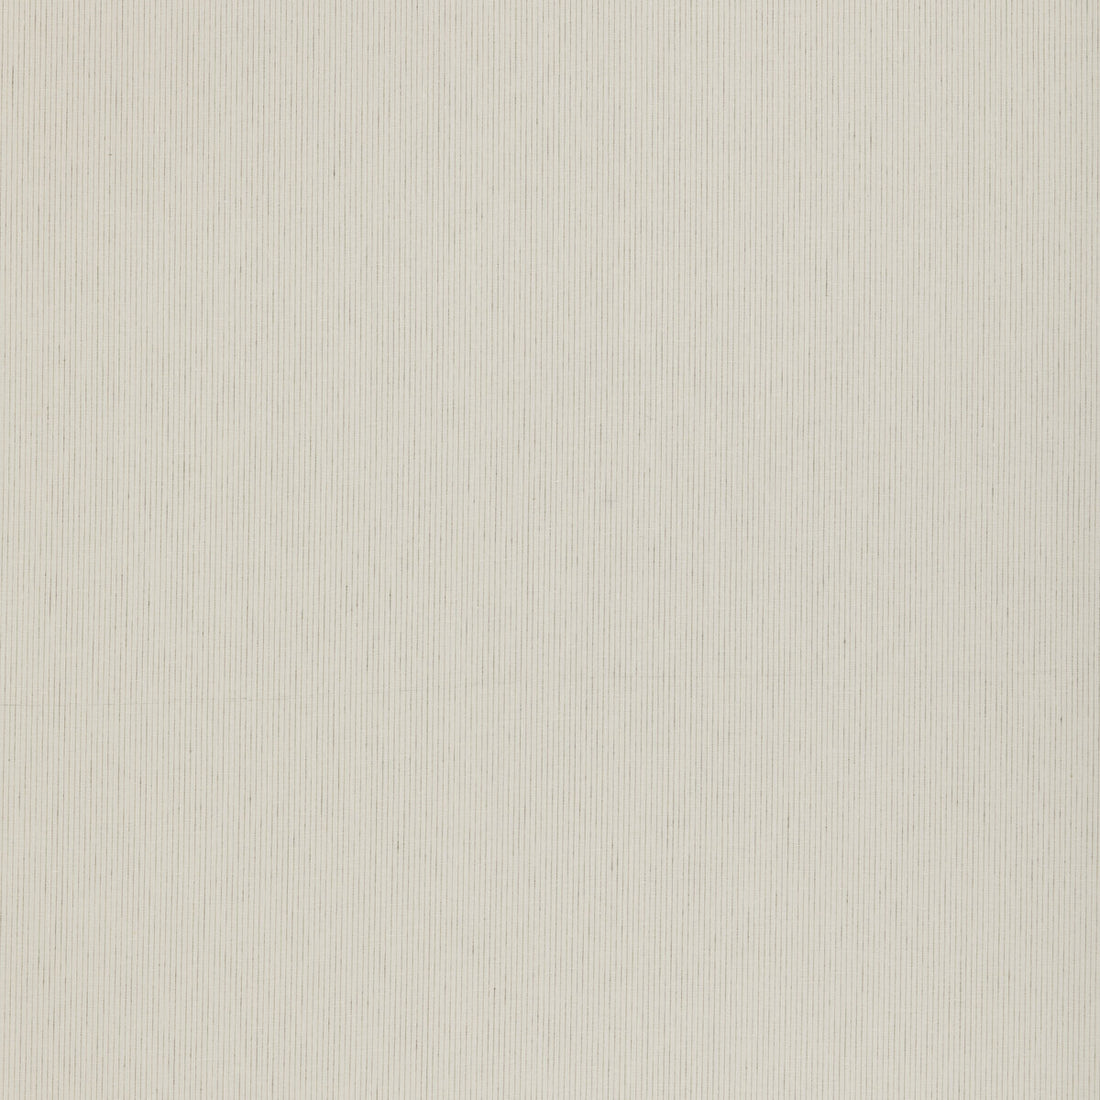 Pampas fabric in ivory color - pattern ED85408.104.0 - by Threads in the Quintessential Naturals collection